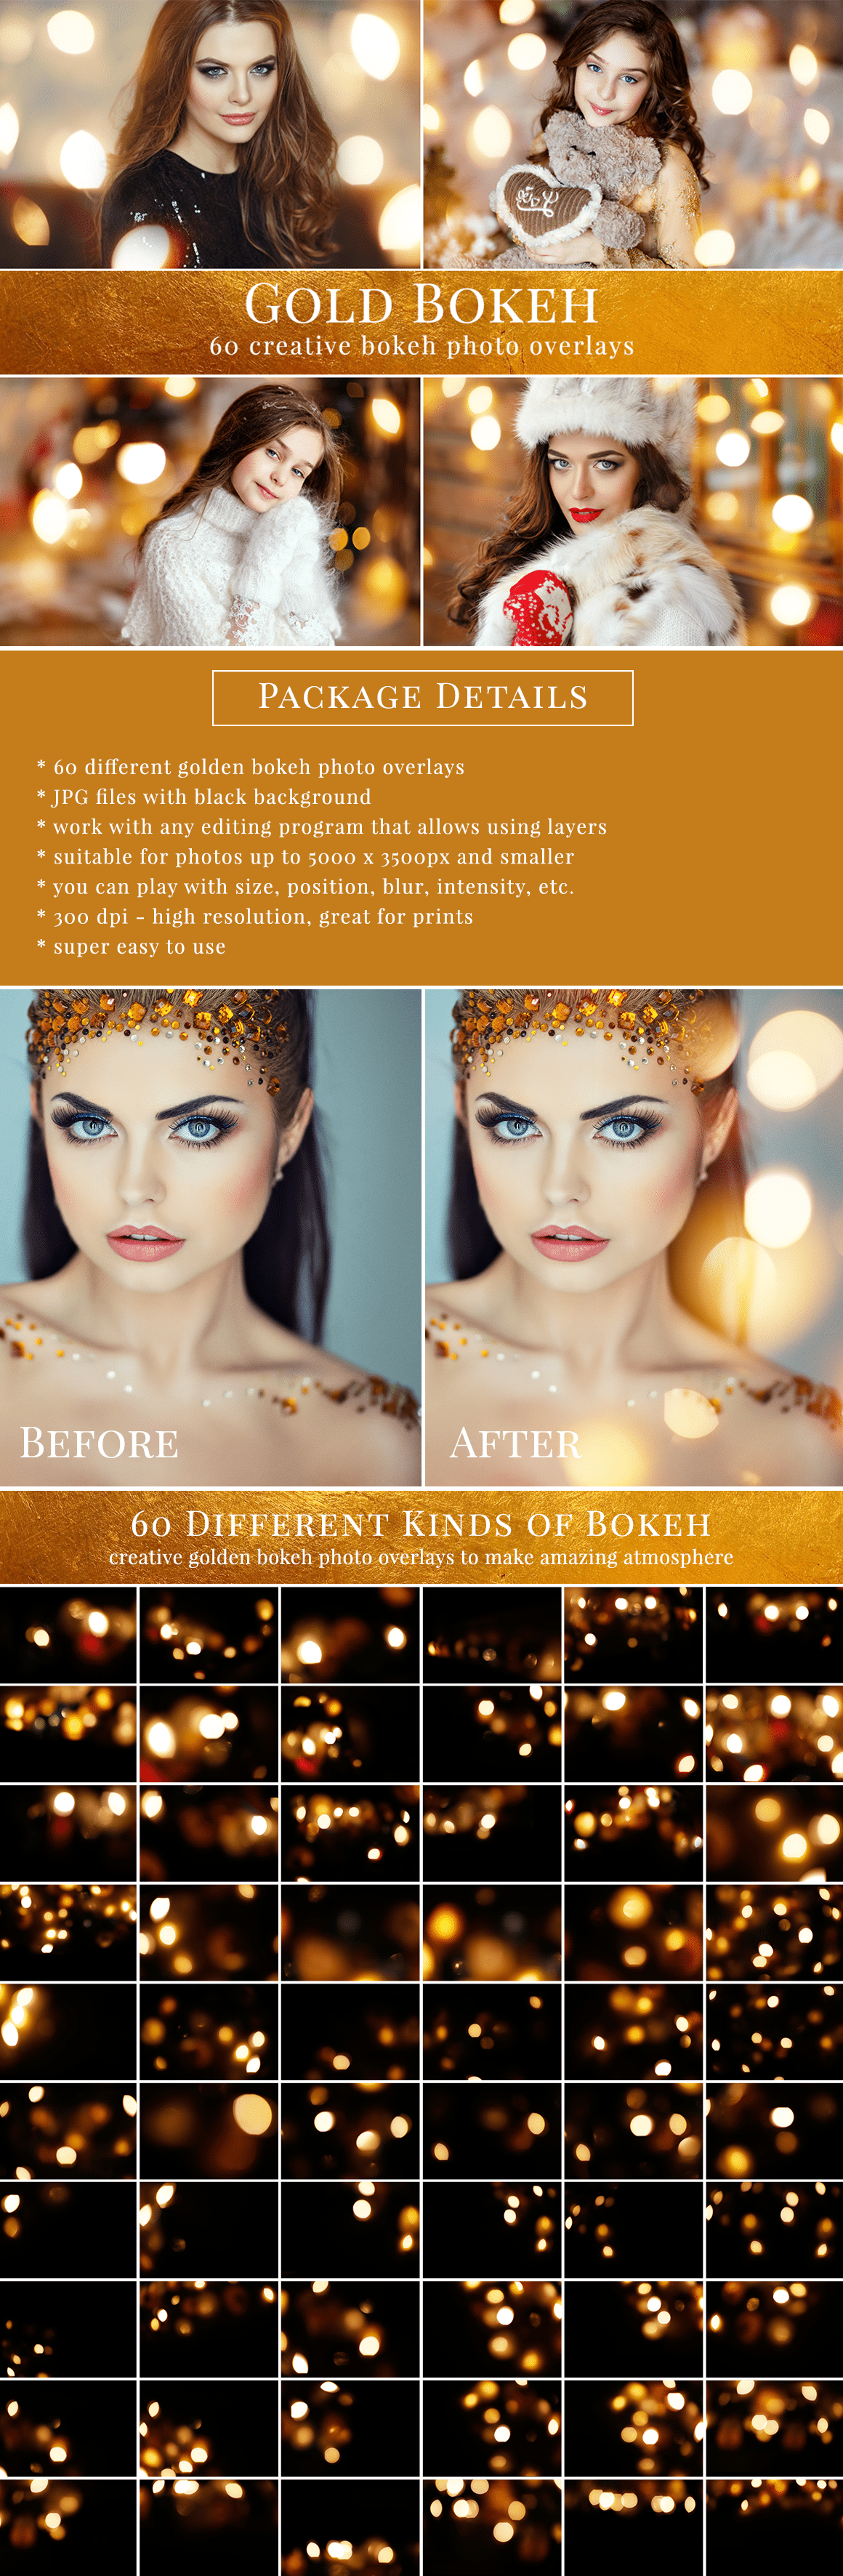 Creative Christmas gold bokeh photo overlays - all you need to style amazing holiday scenes. Great for Christmas mini sessions but also for glamour portrait and sunset pictures. Professional photo overlays for Photoshop, Zoner, Gimp etc. Super easy & fast to use, very pretty result just in one minute. Photo overlays for creative photographers from Brown Leopard. 